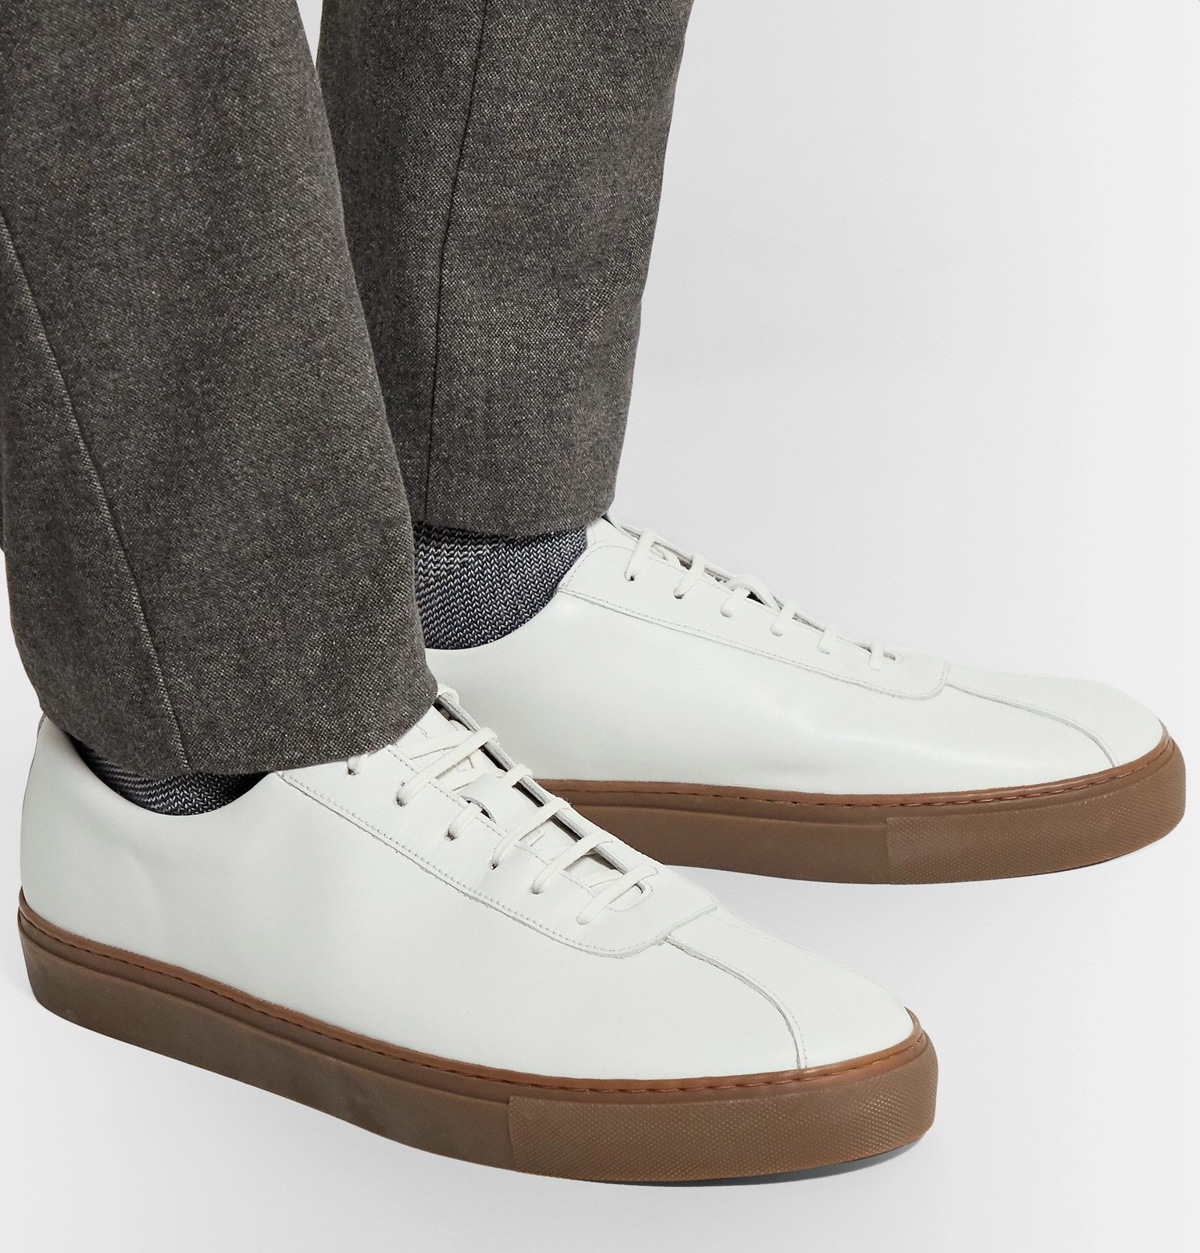 Grenson - Leather Sneakers - White Grenson